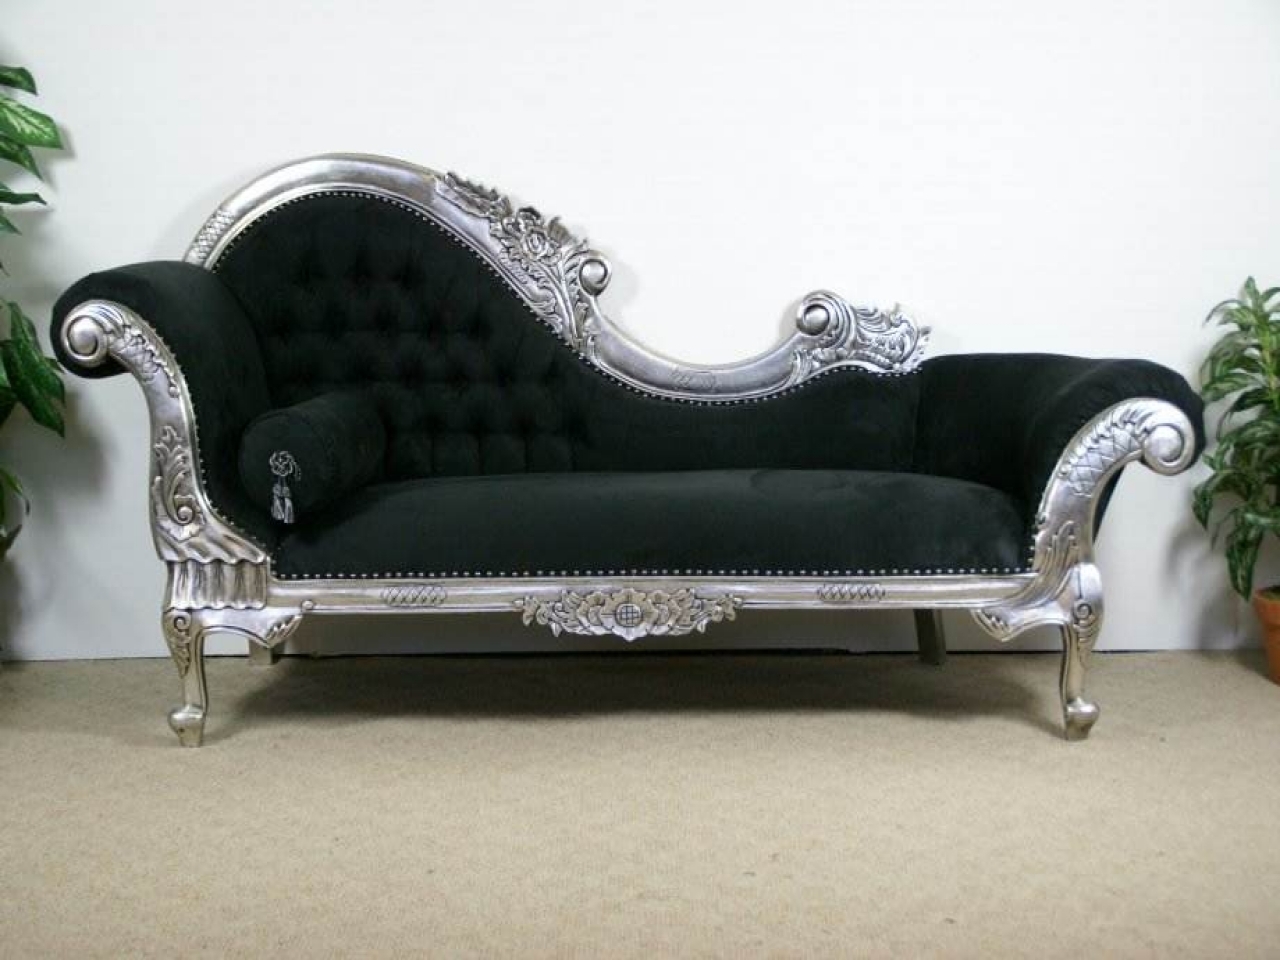 Vintage chaise lounge